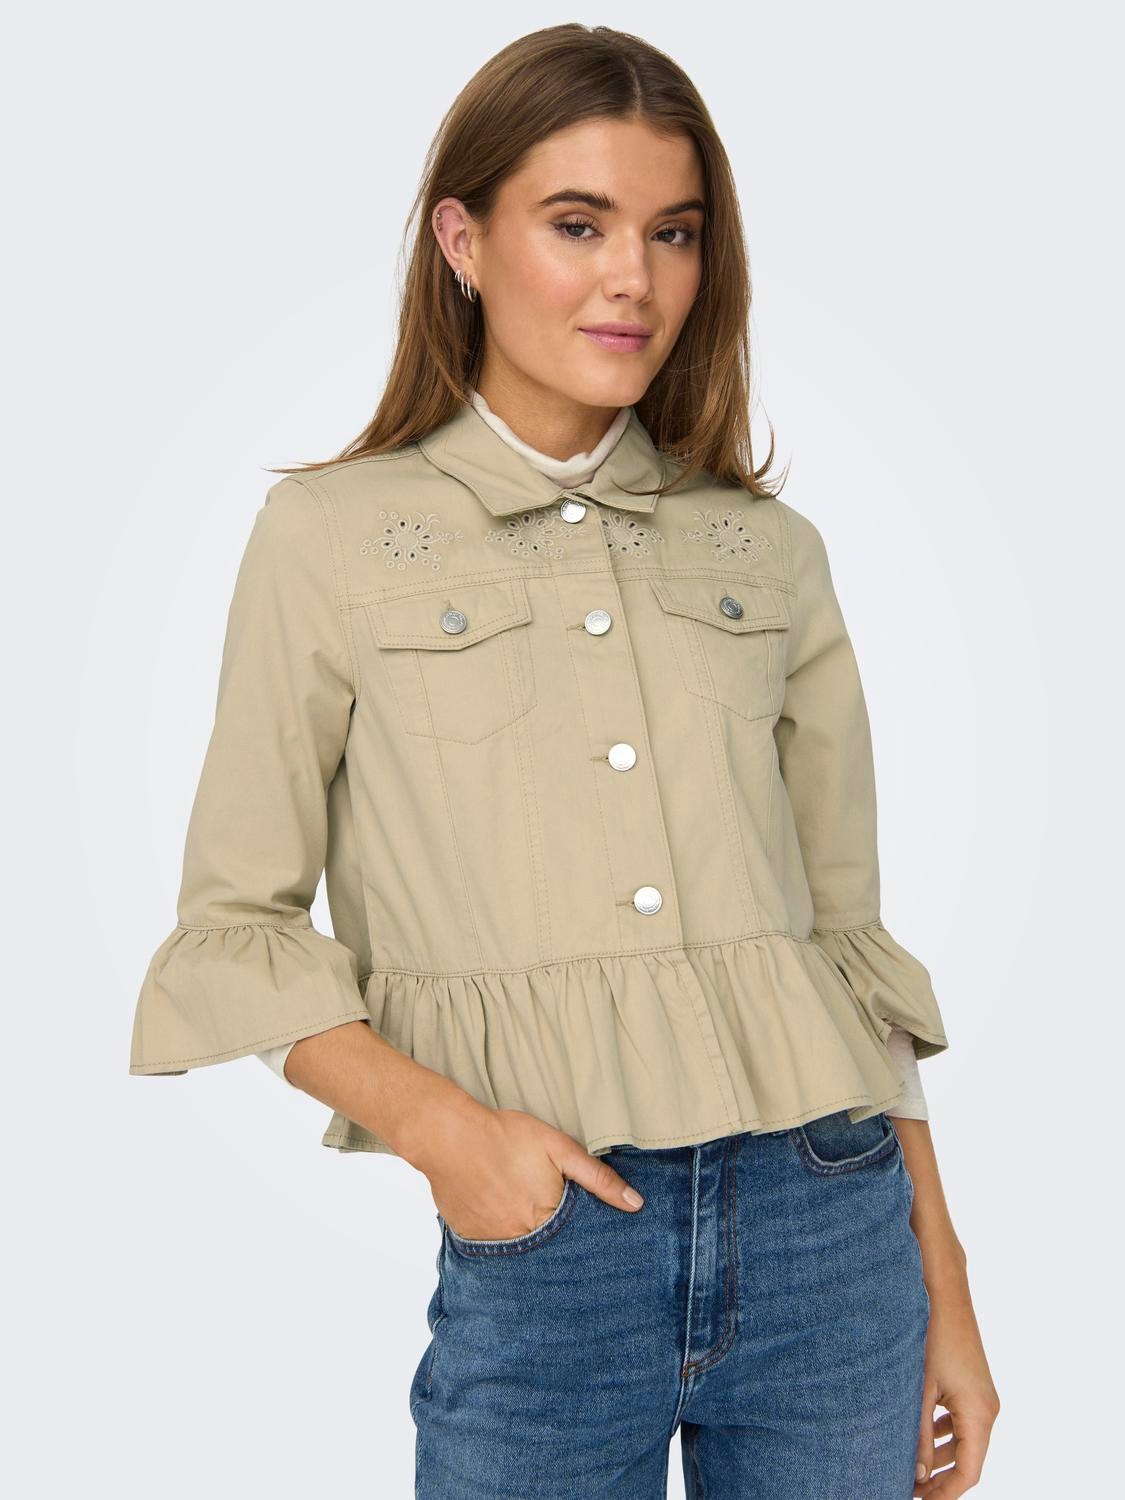 ONLY Spread collar Jacket -Pale Khaki - 15314650